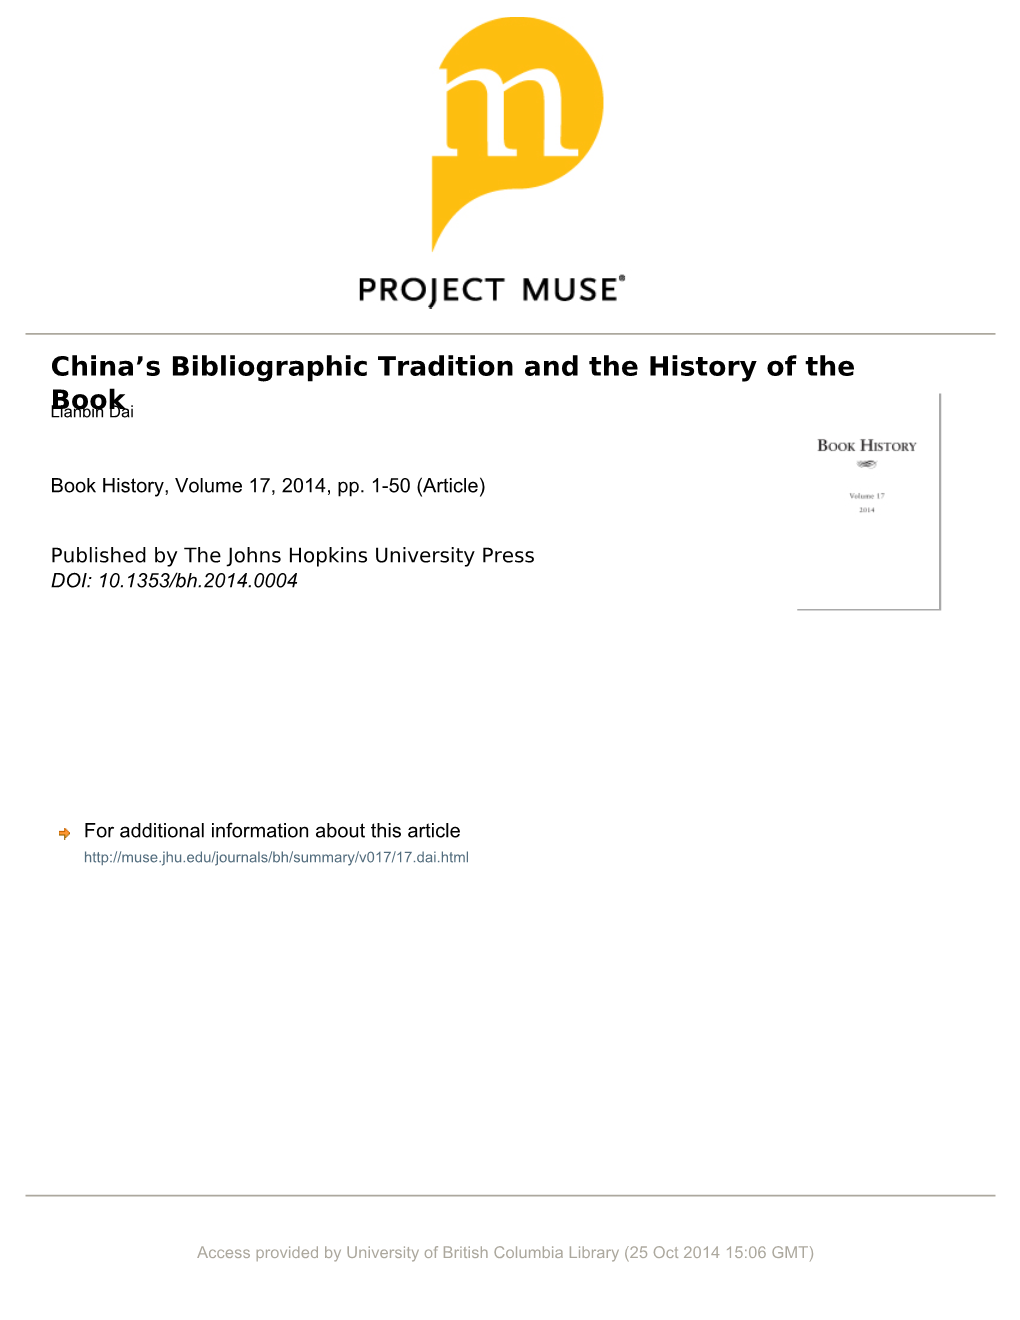 China's Bibliographic Tradition and the History of the Book